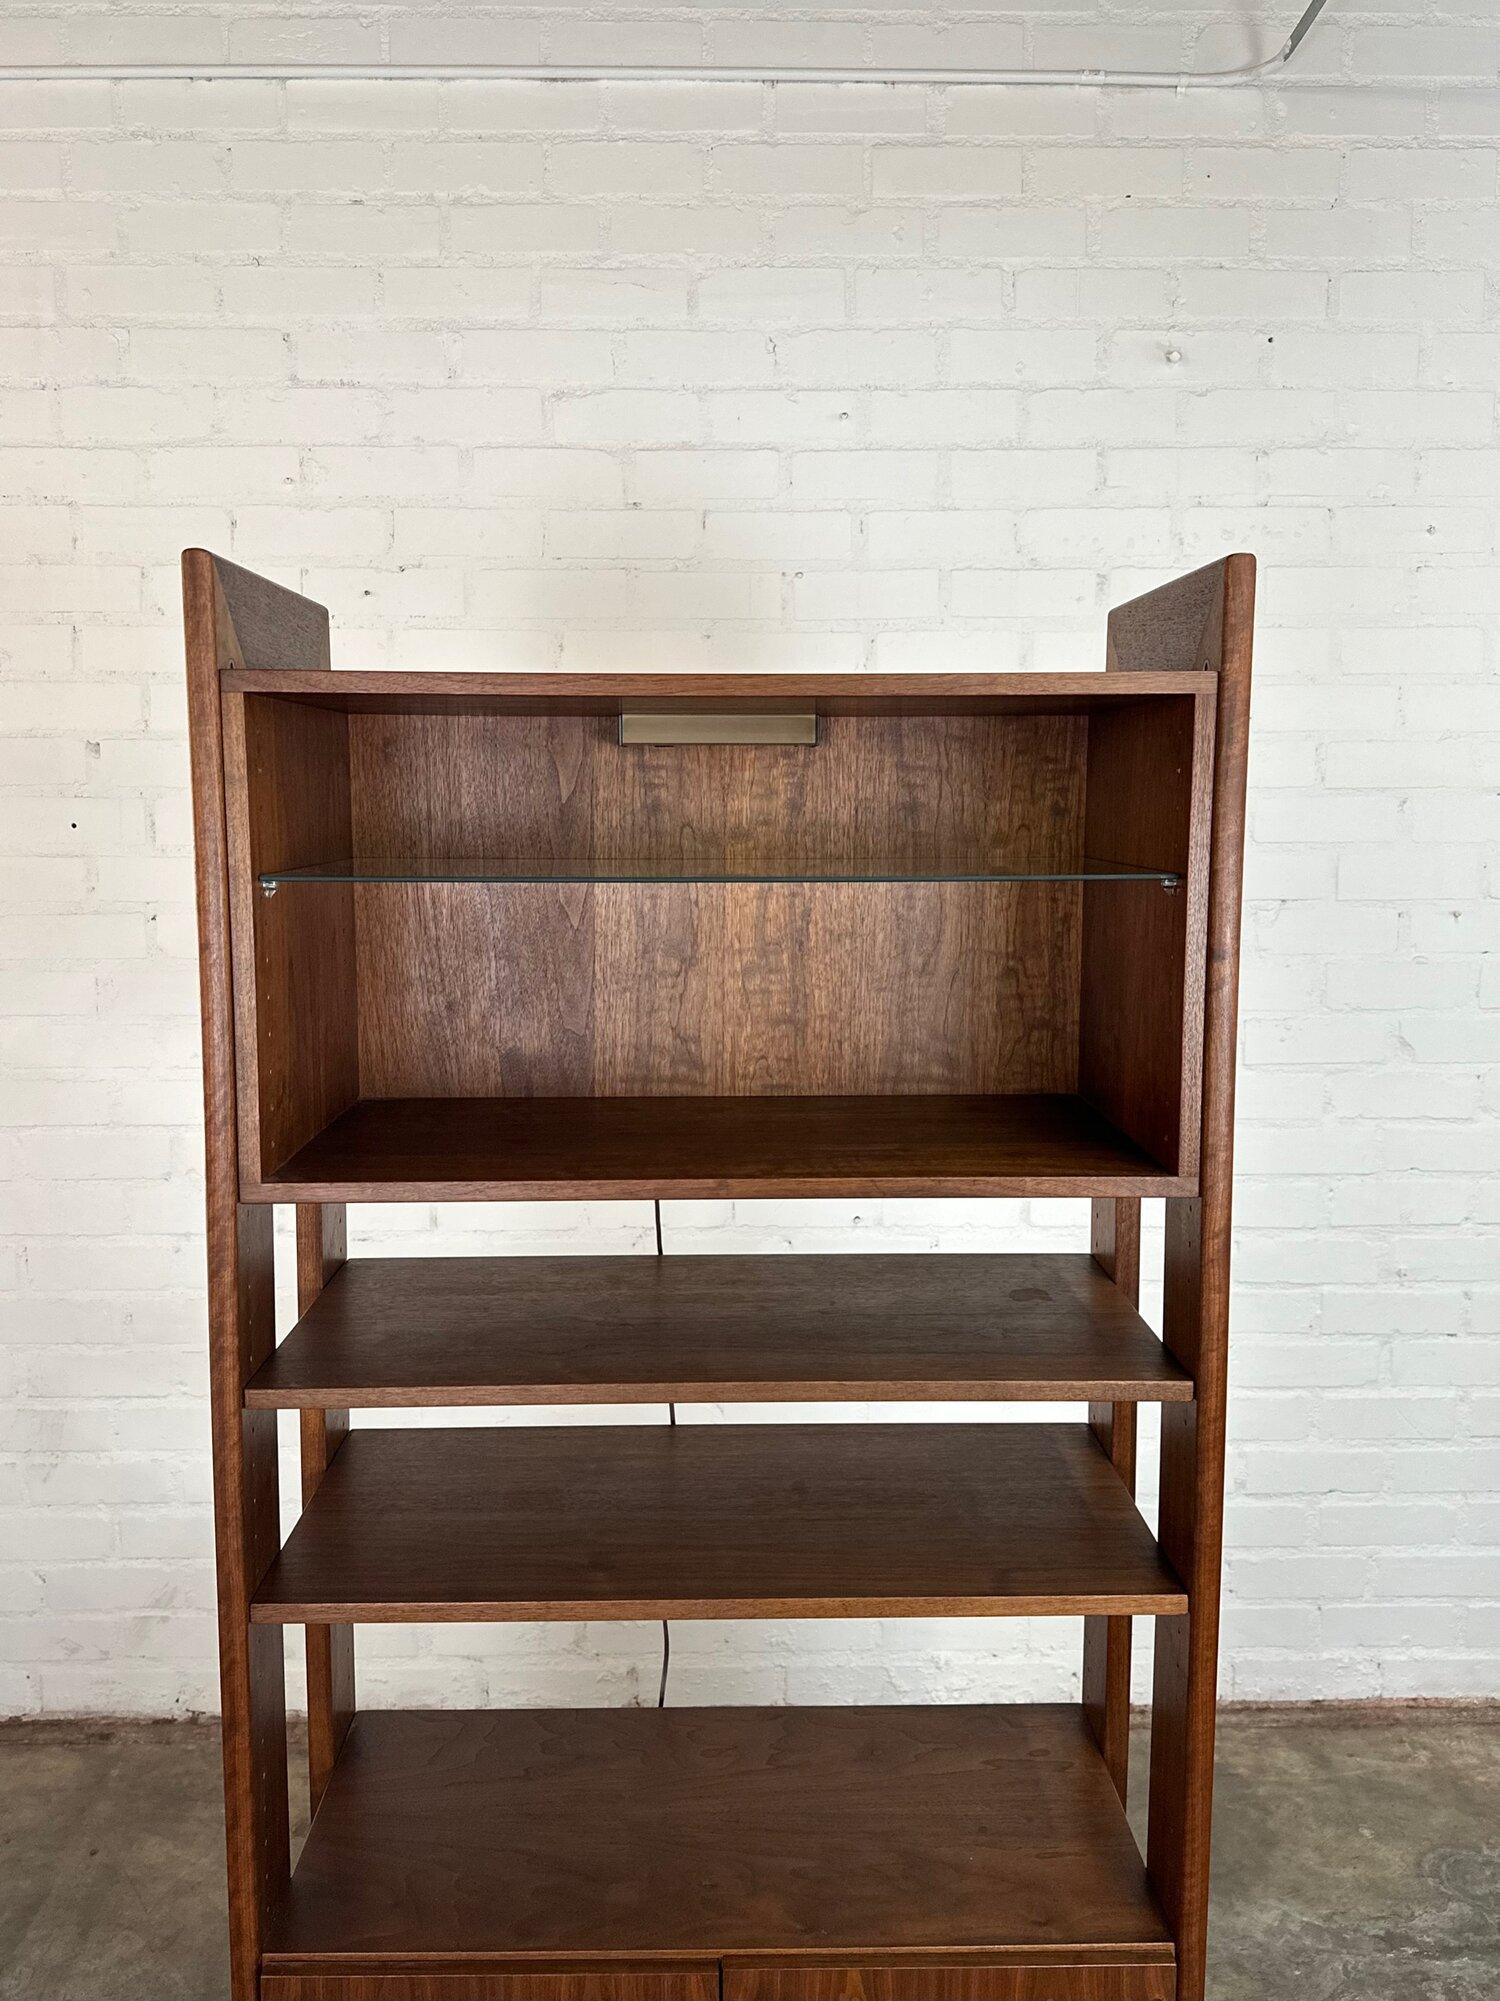 Mid-Century Modern Barzilay style free standing bookcase #1 For Sale